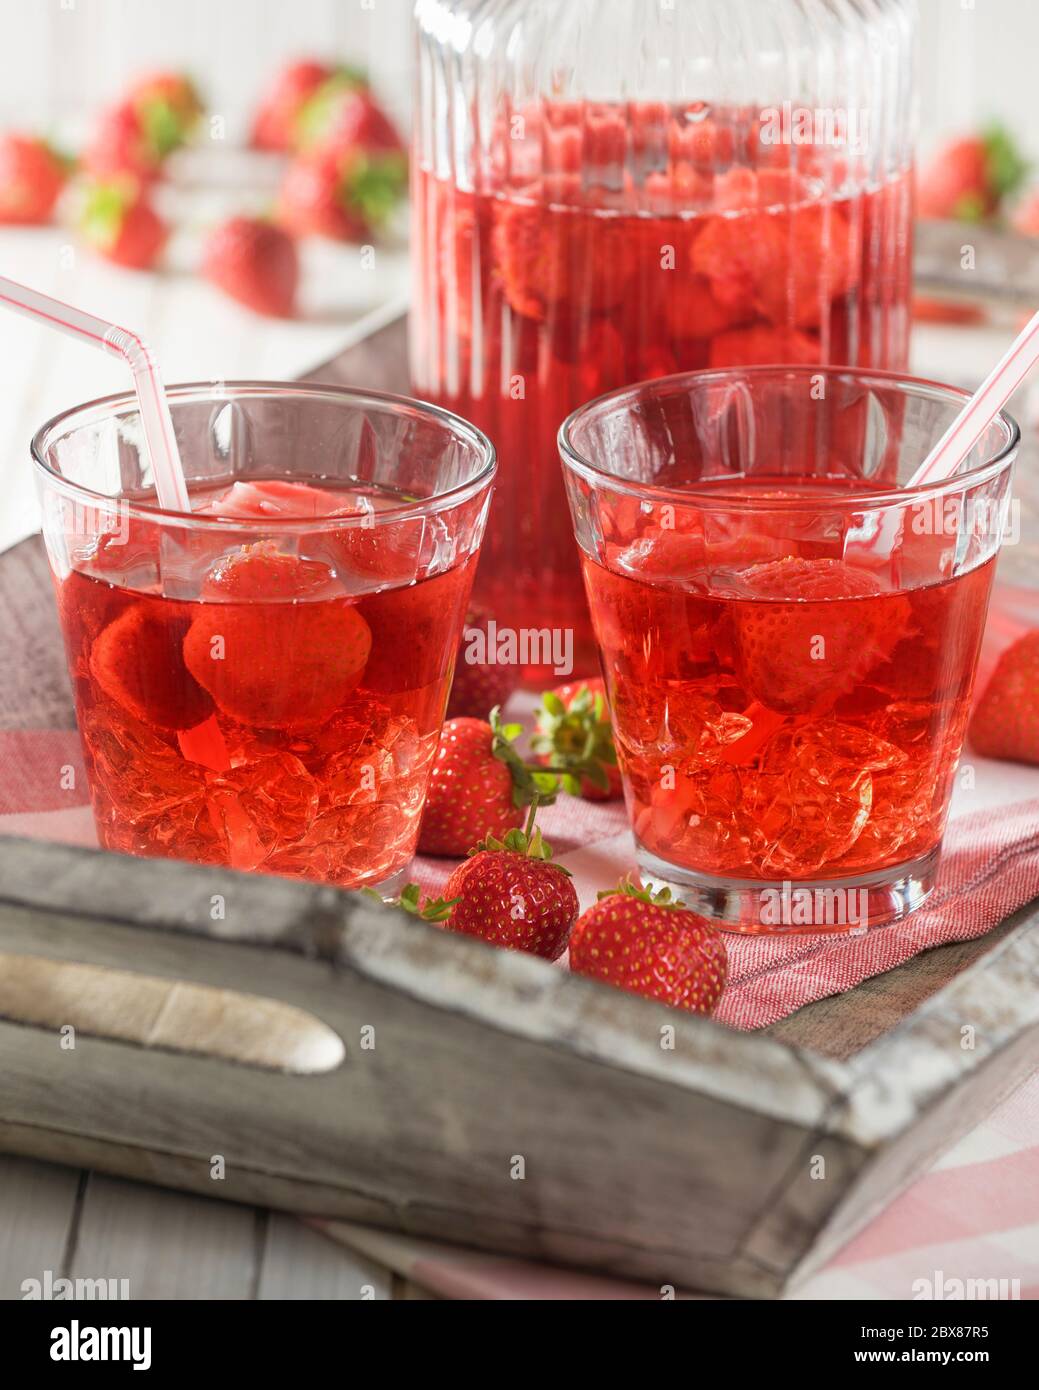 Strawberry kompot. Cold Polish and Central European fruit drink. Stock Photo